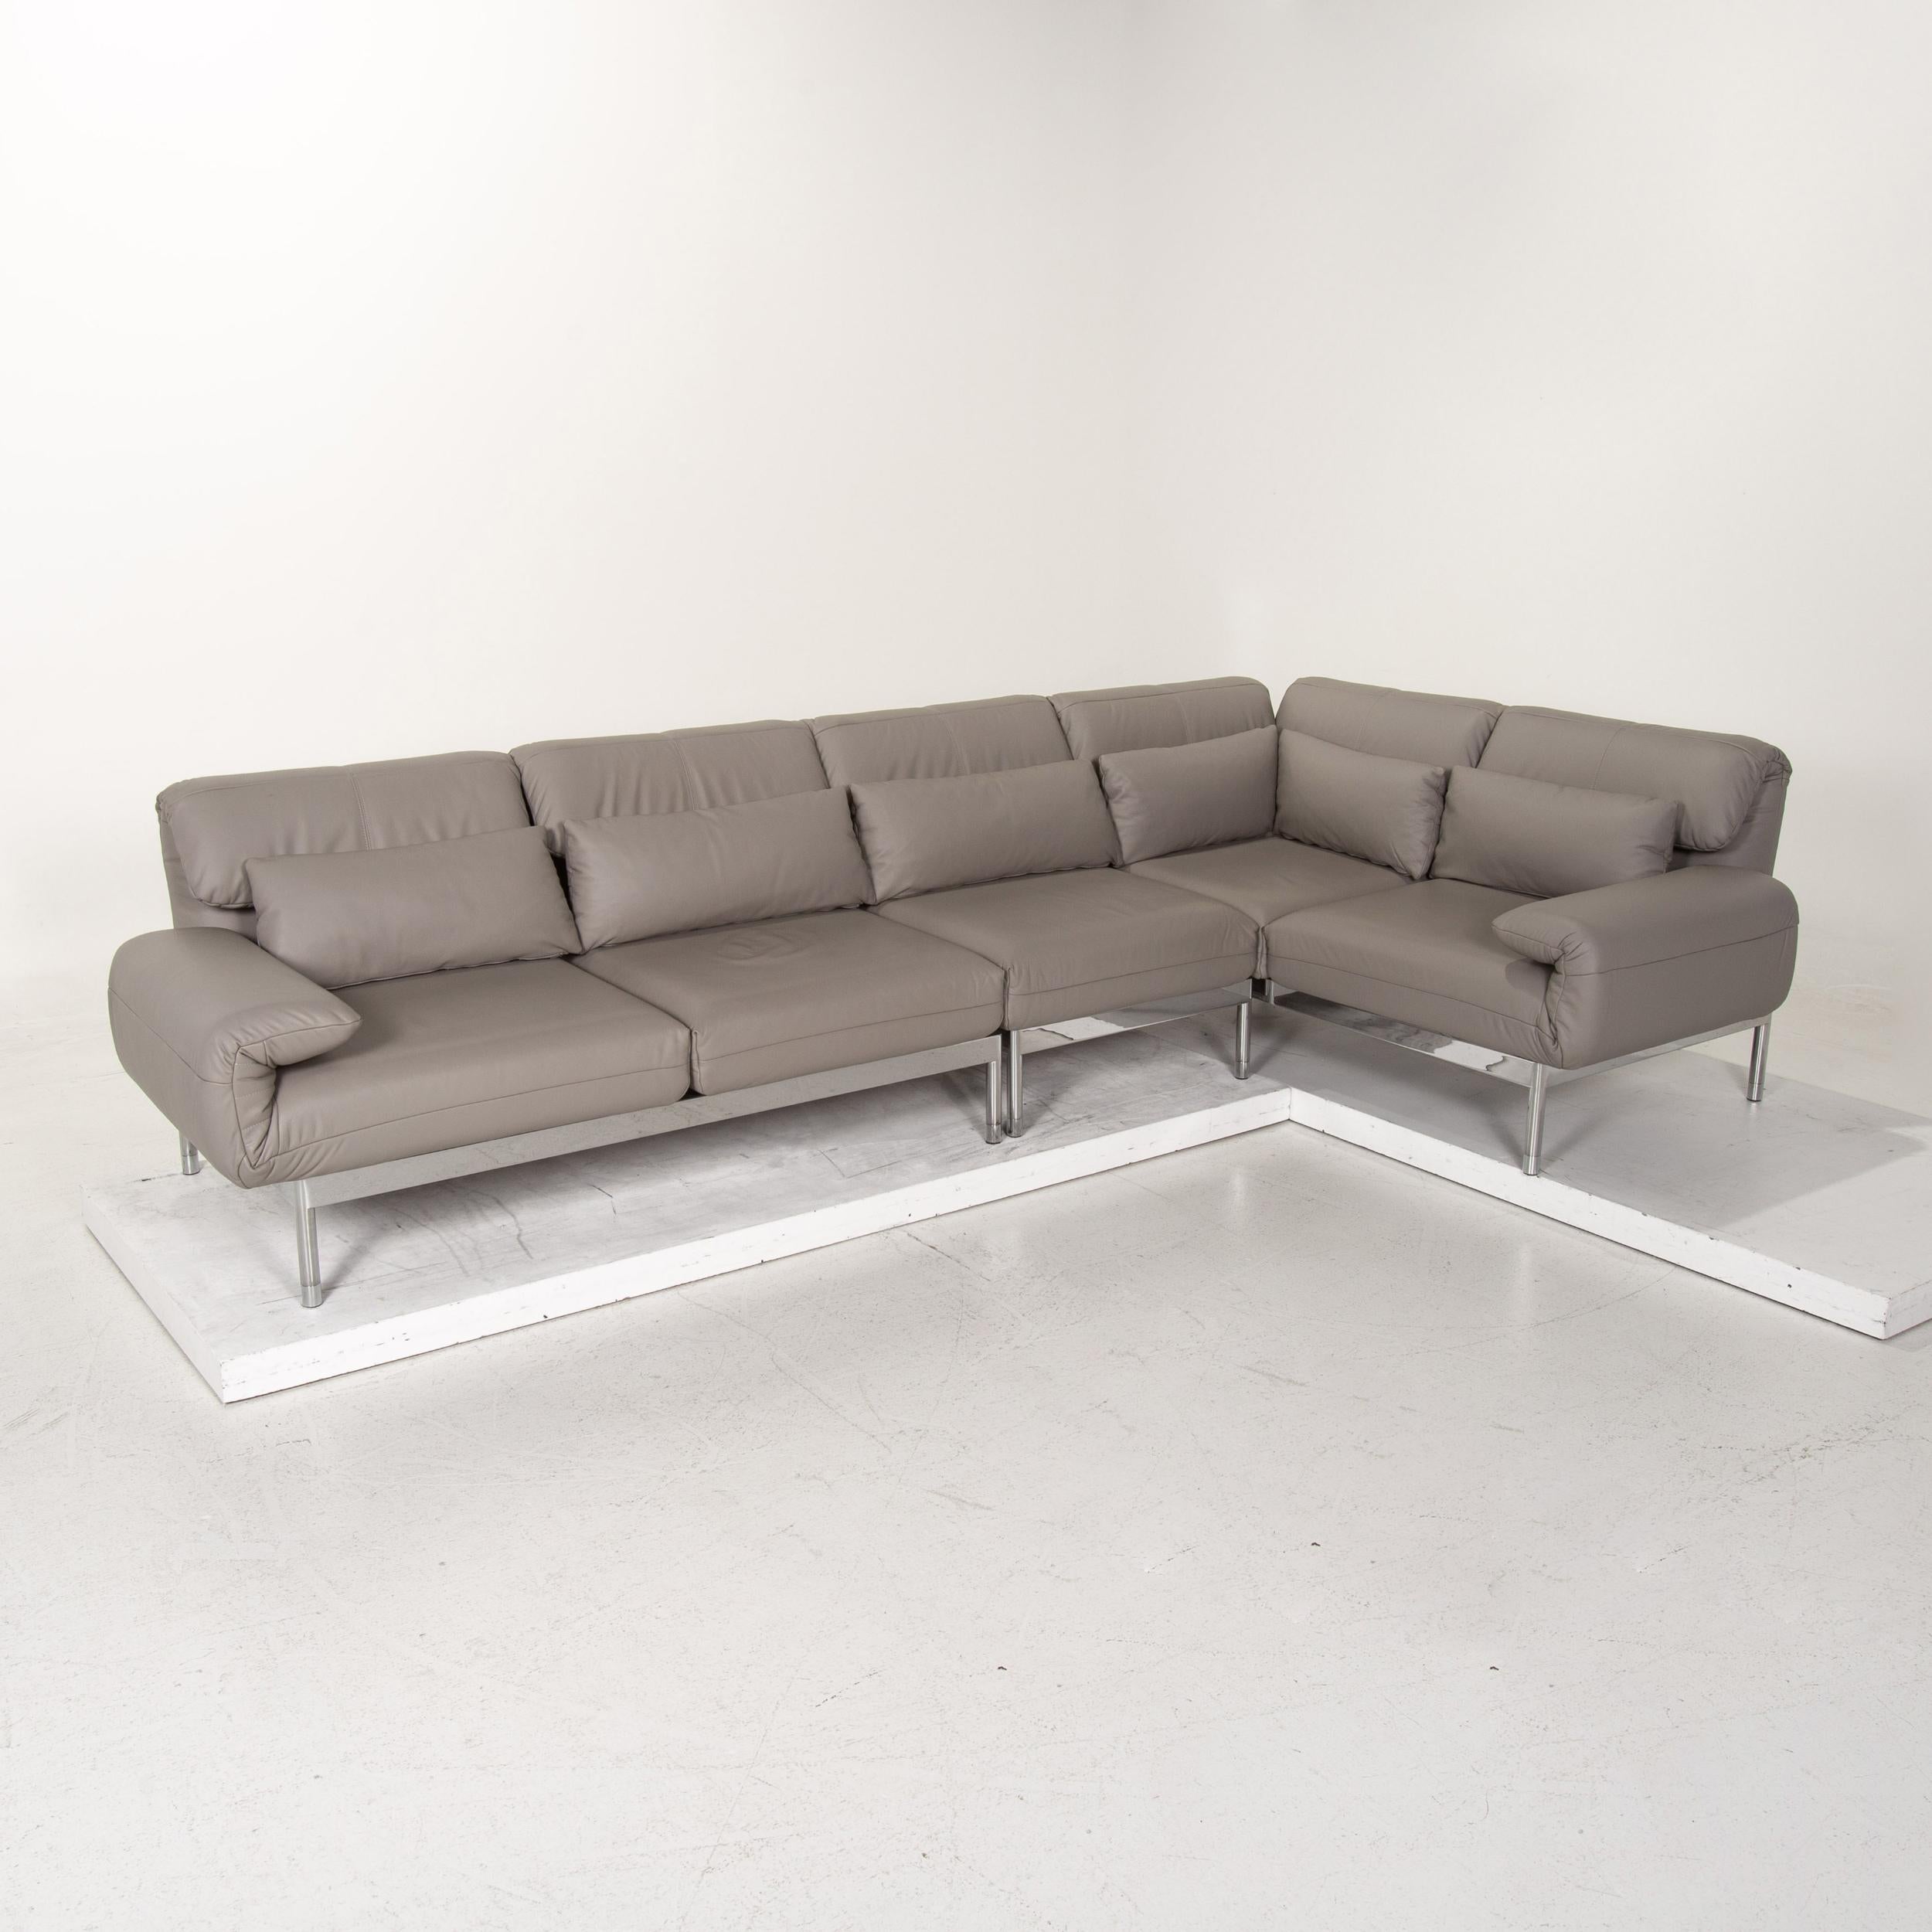 Rolf Benz Plura Leather Corner Sofa Gray Sofa Function Relax Function Couch 3